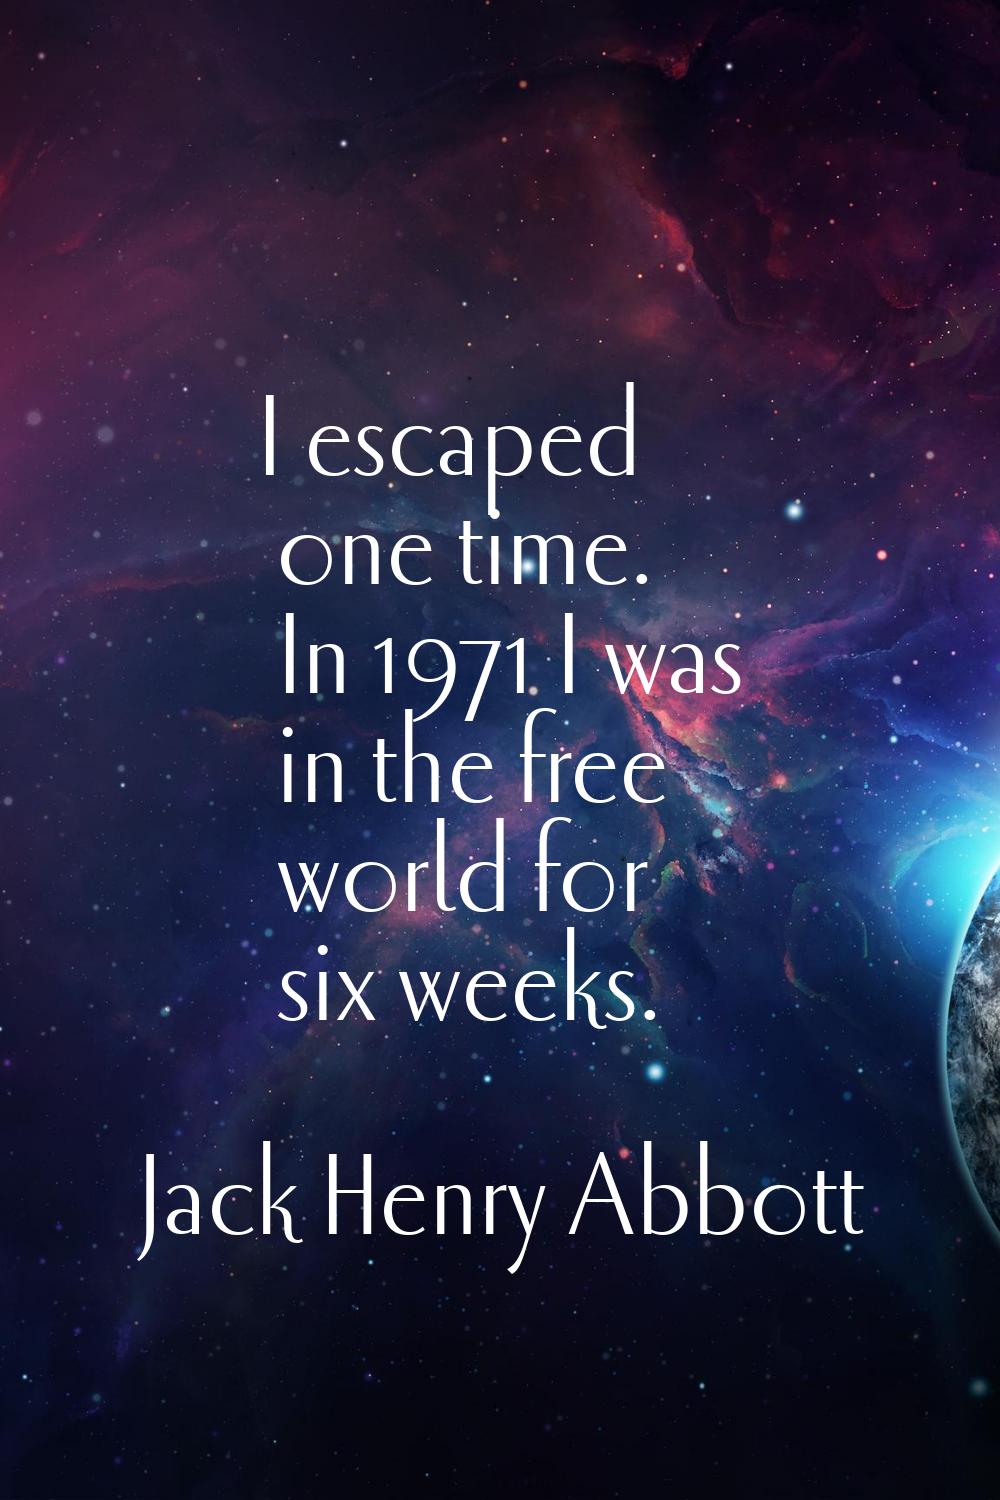 I escaped one time. In 1971 I was in the free world for six weeks.